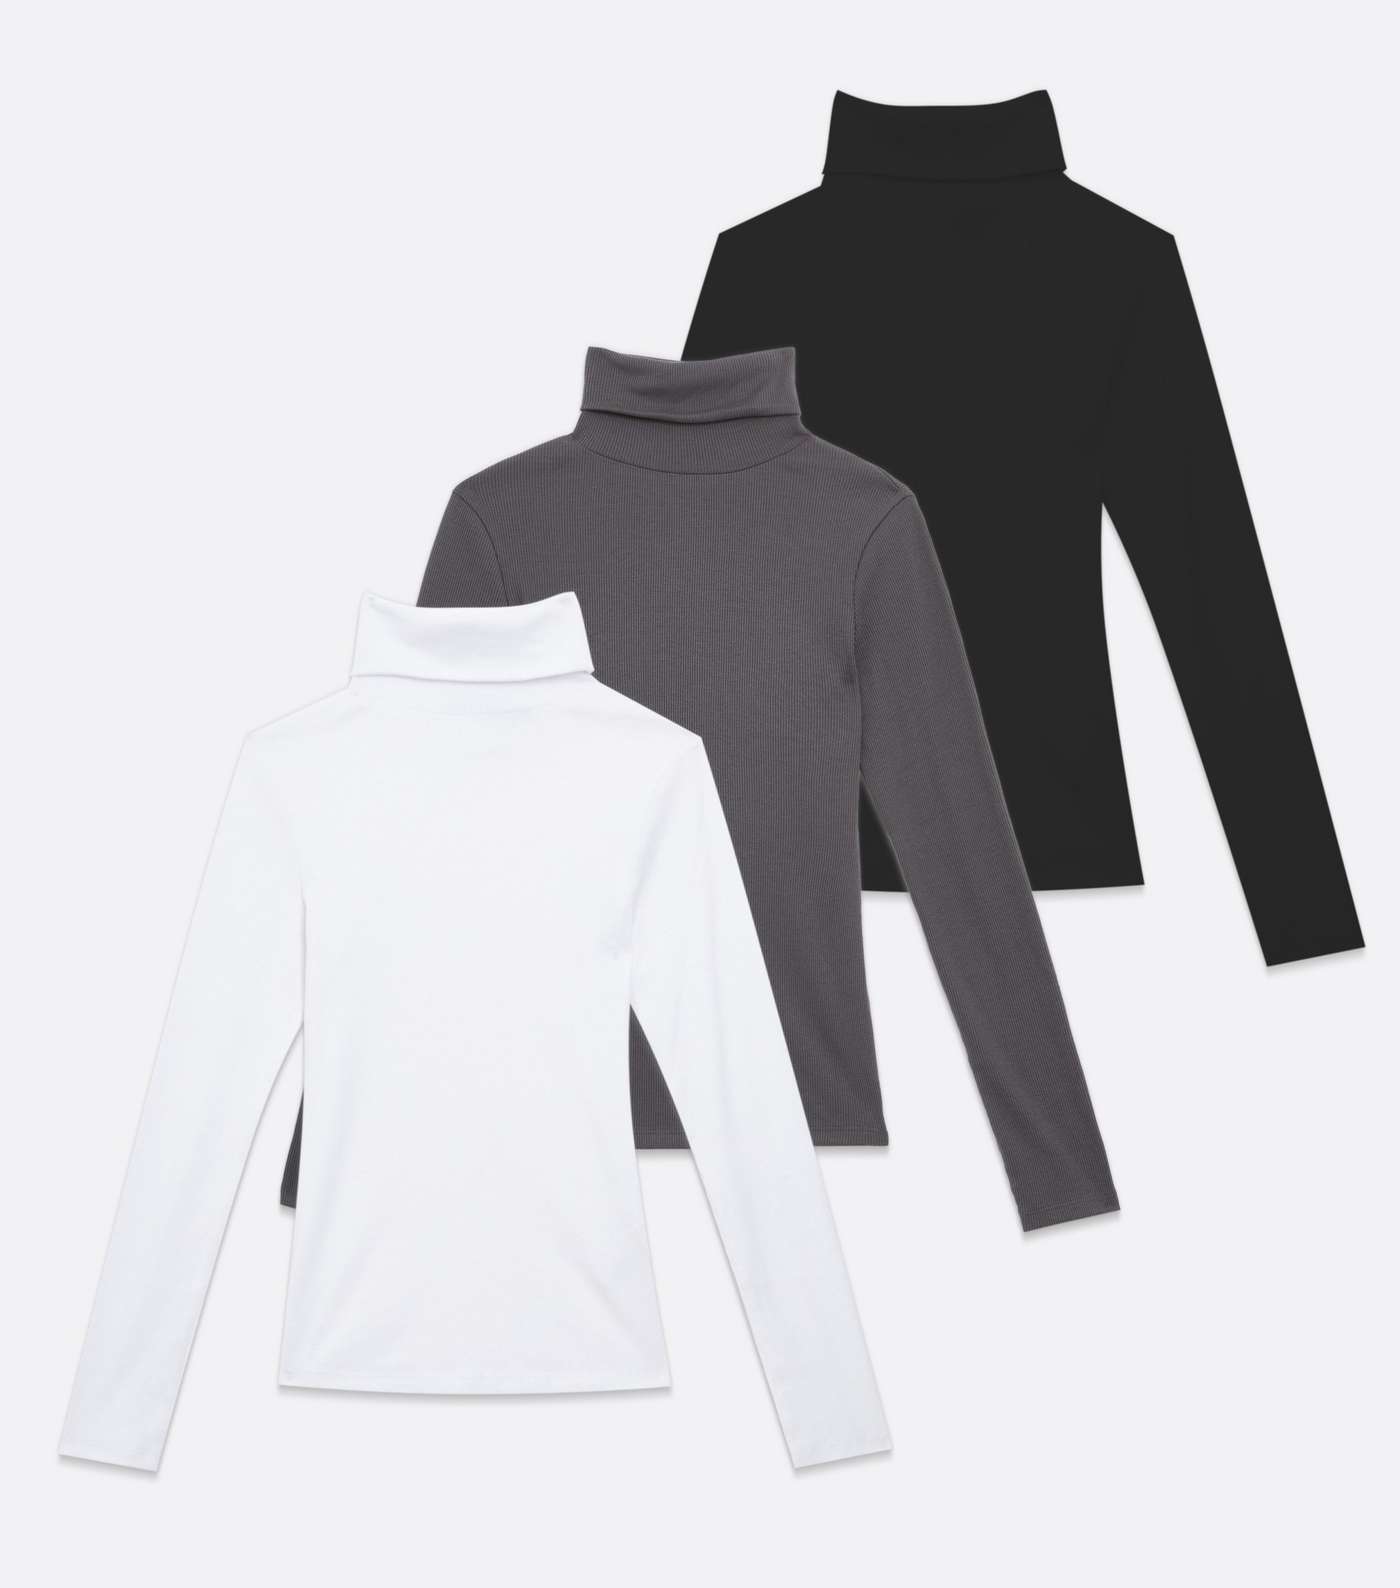 Petite 3 Pack Grey Black and White Roll Neck Tops Image 5